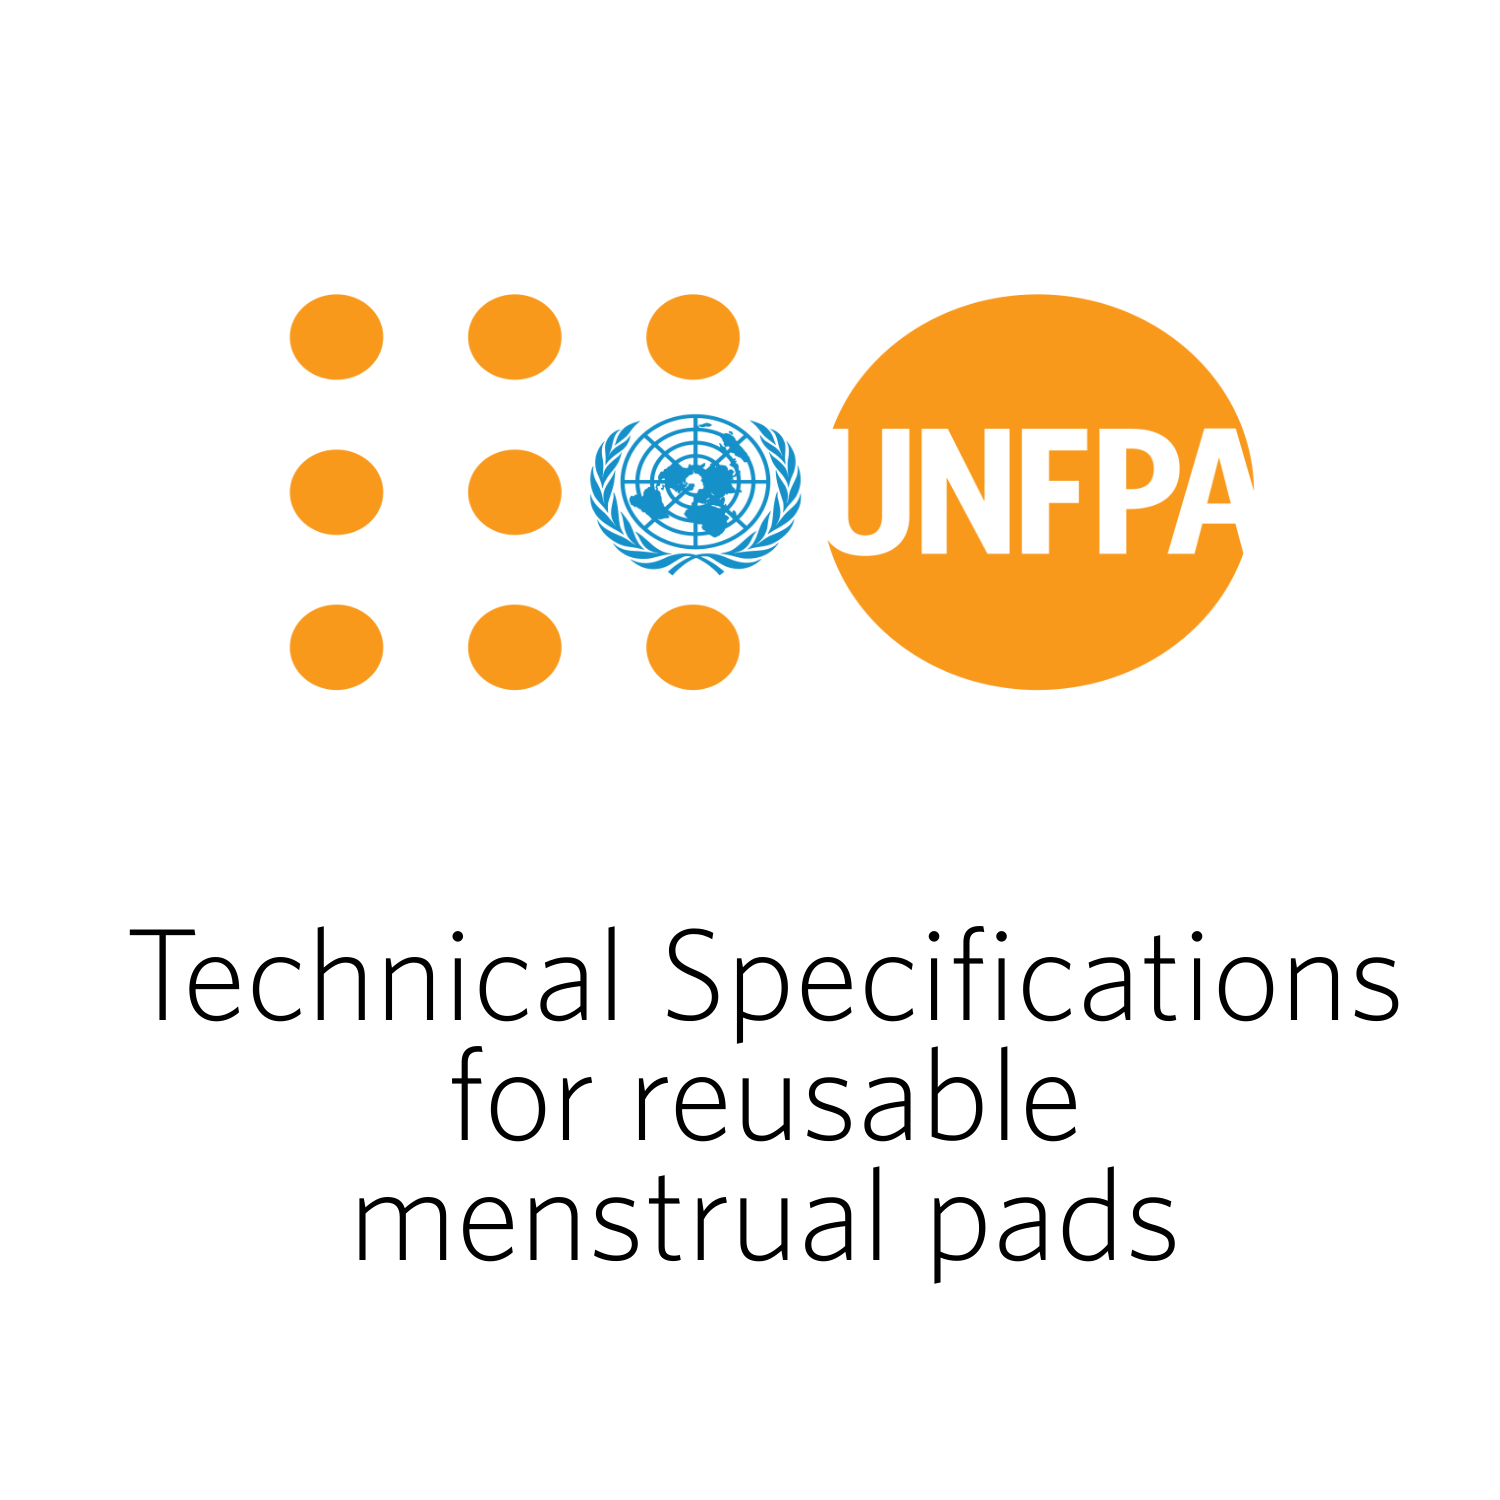 Technical Specifications for reusable menstrual pads